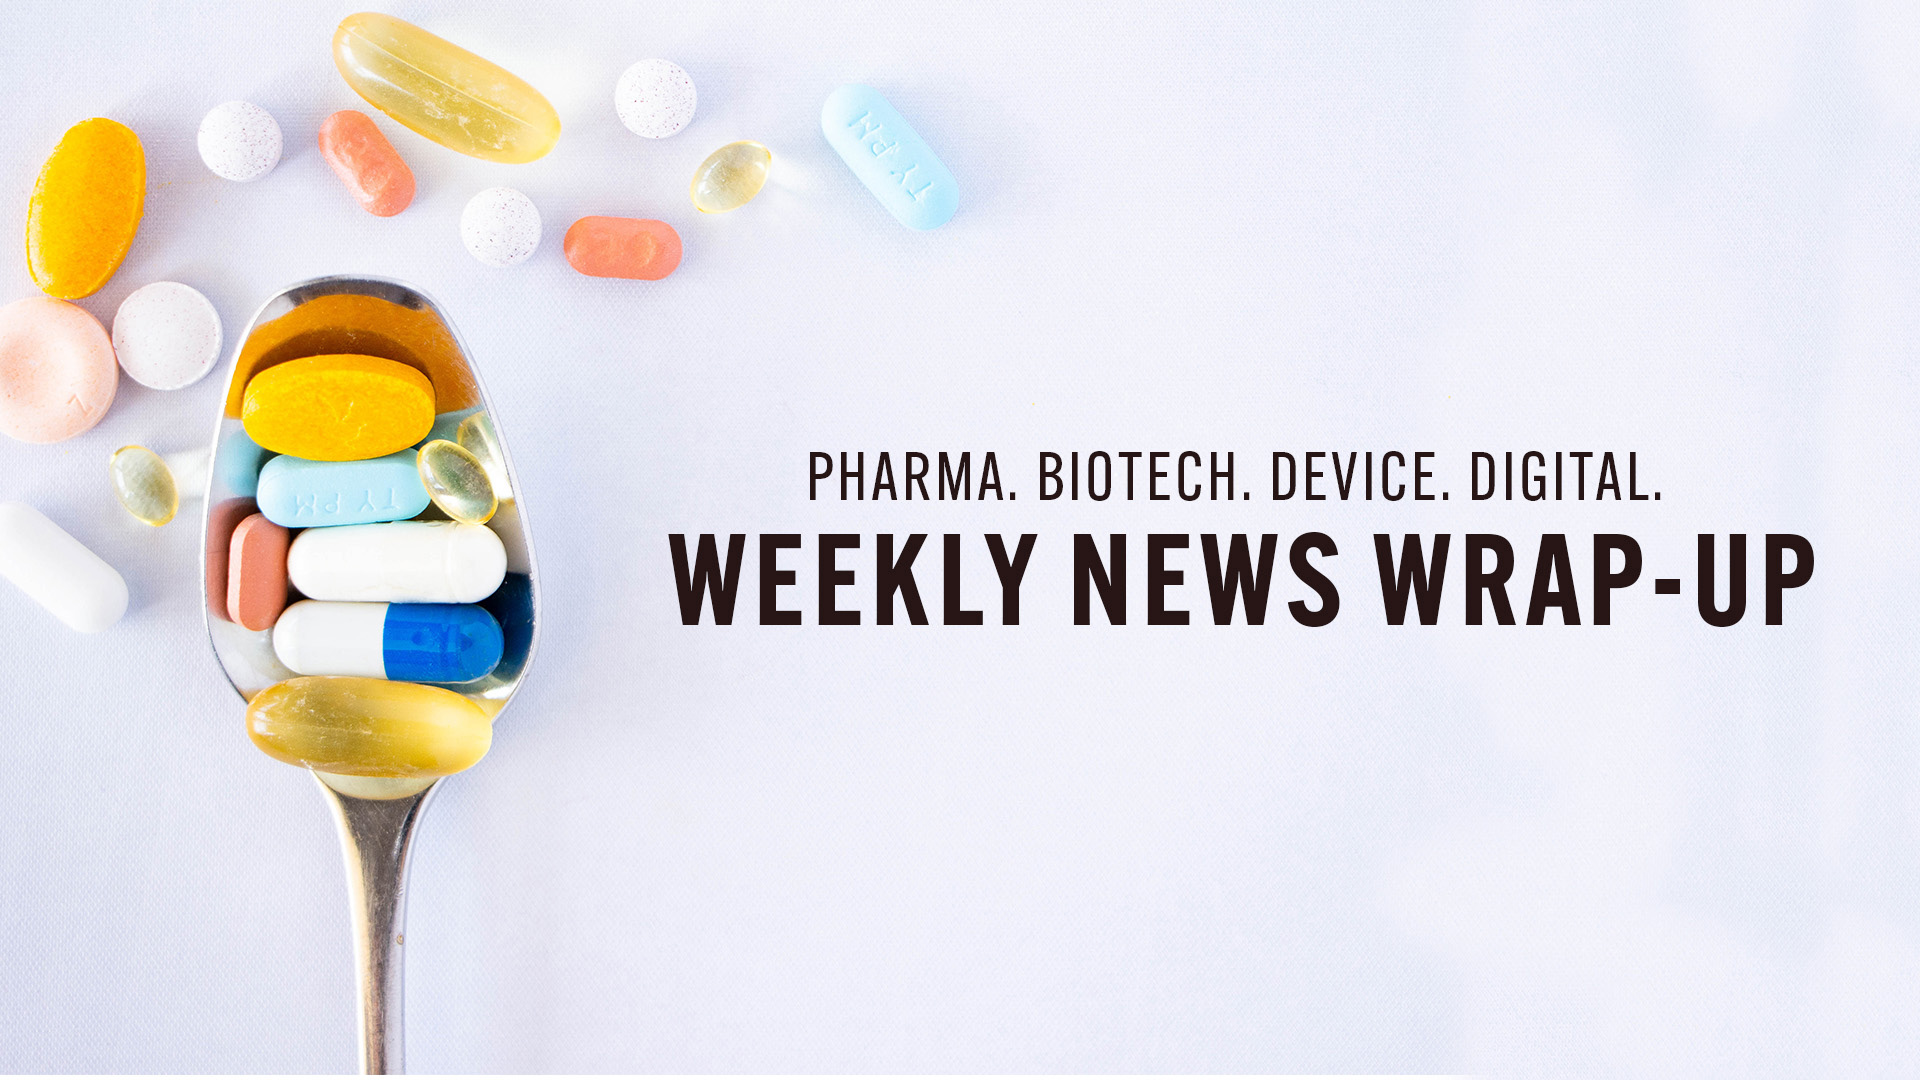 Healthcare Industry News Weekly Wrap-Up: October 13, 2022